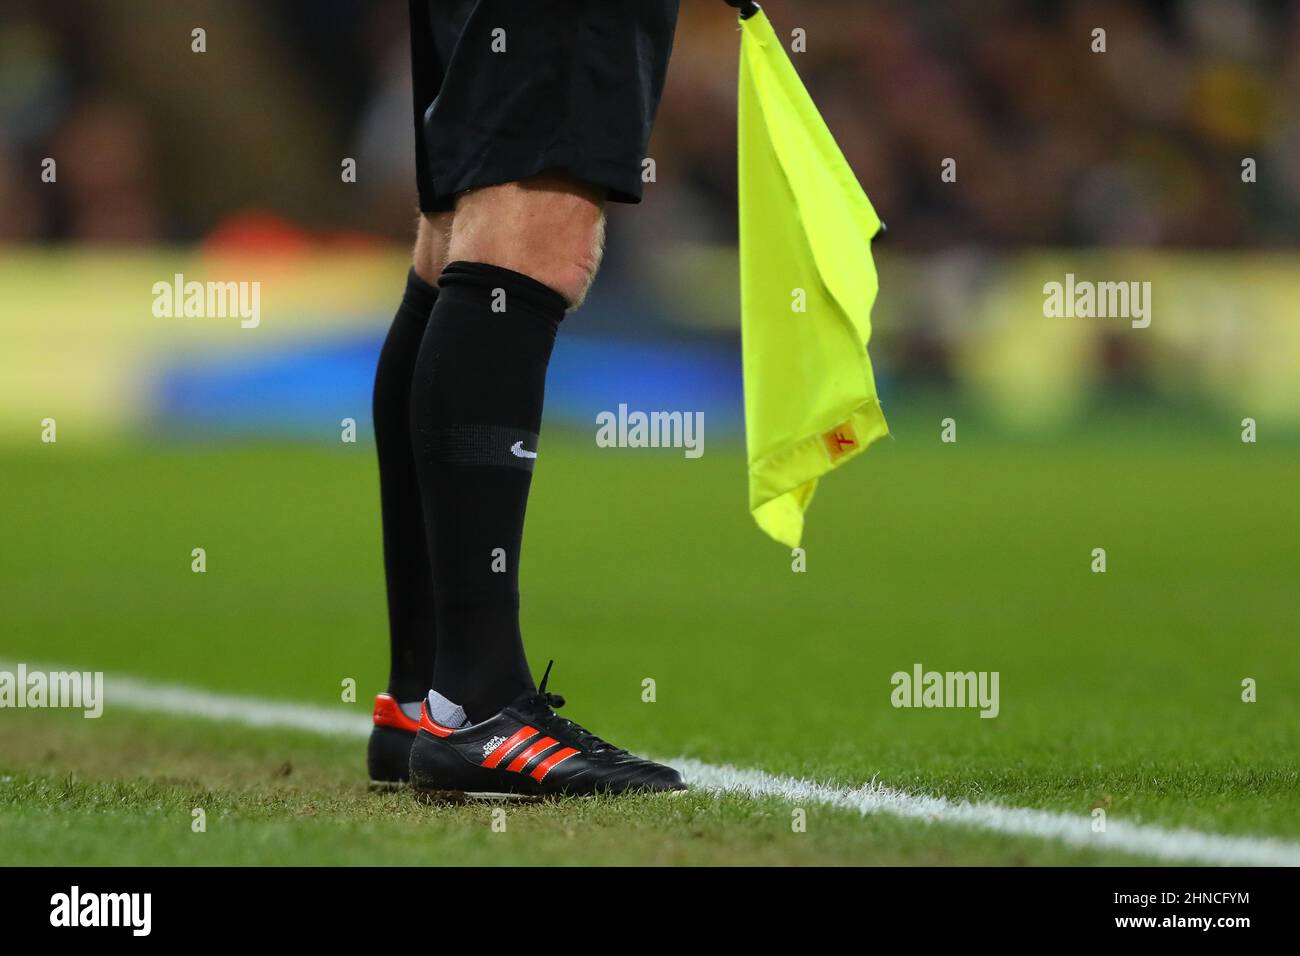 Adidas Orange Striped Copa Mundial boot worn by The RefereeÕs Assistant - Norwich City v Manchester City, Premier League, Carrow Road, Norwich, UK - 12th February 2022  Editorial Use Only - DataCo restrictions apply Stock Photo